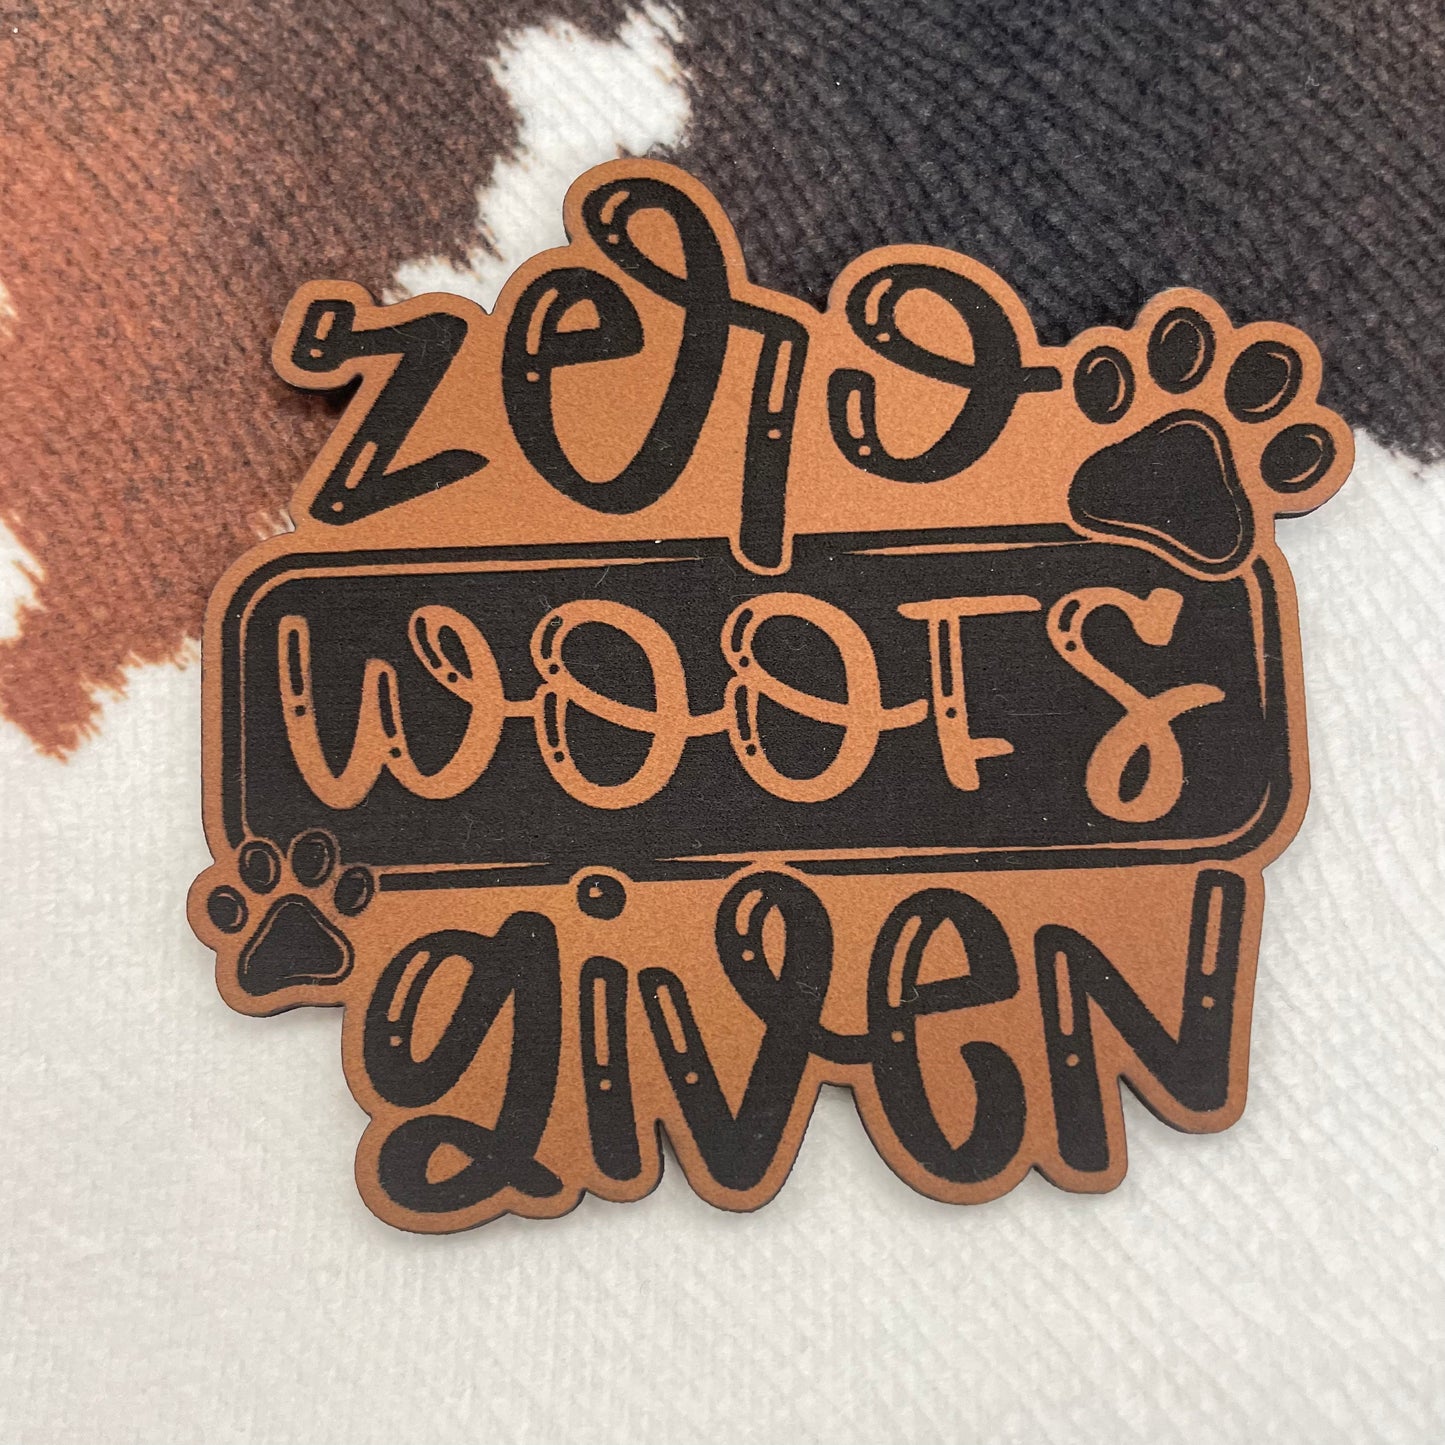 Zero Woofs Given - 2.8" wide x 2.5" tall Leatherette Patch